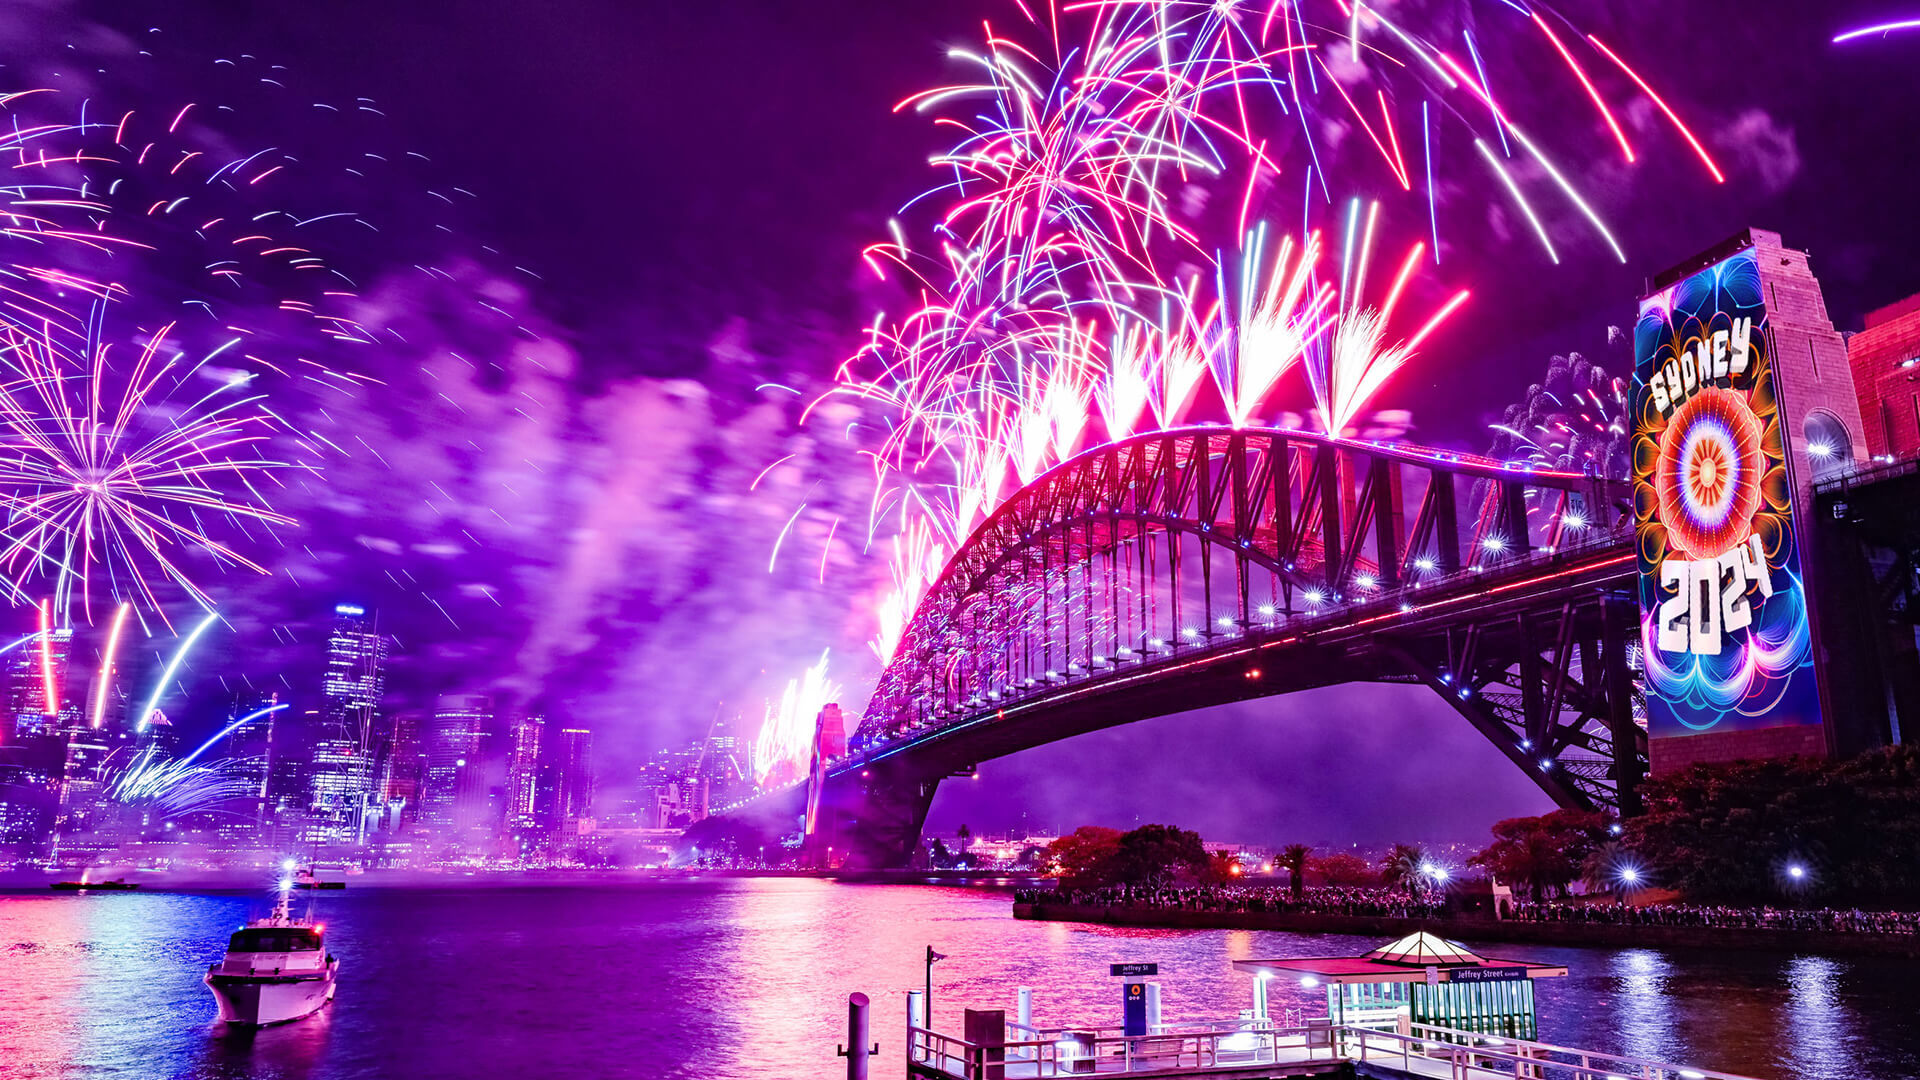 New Years Eve Celebrations and Fireworks on the Sydney Harbour Bridge